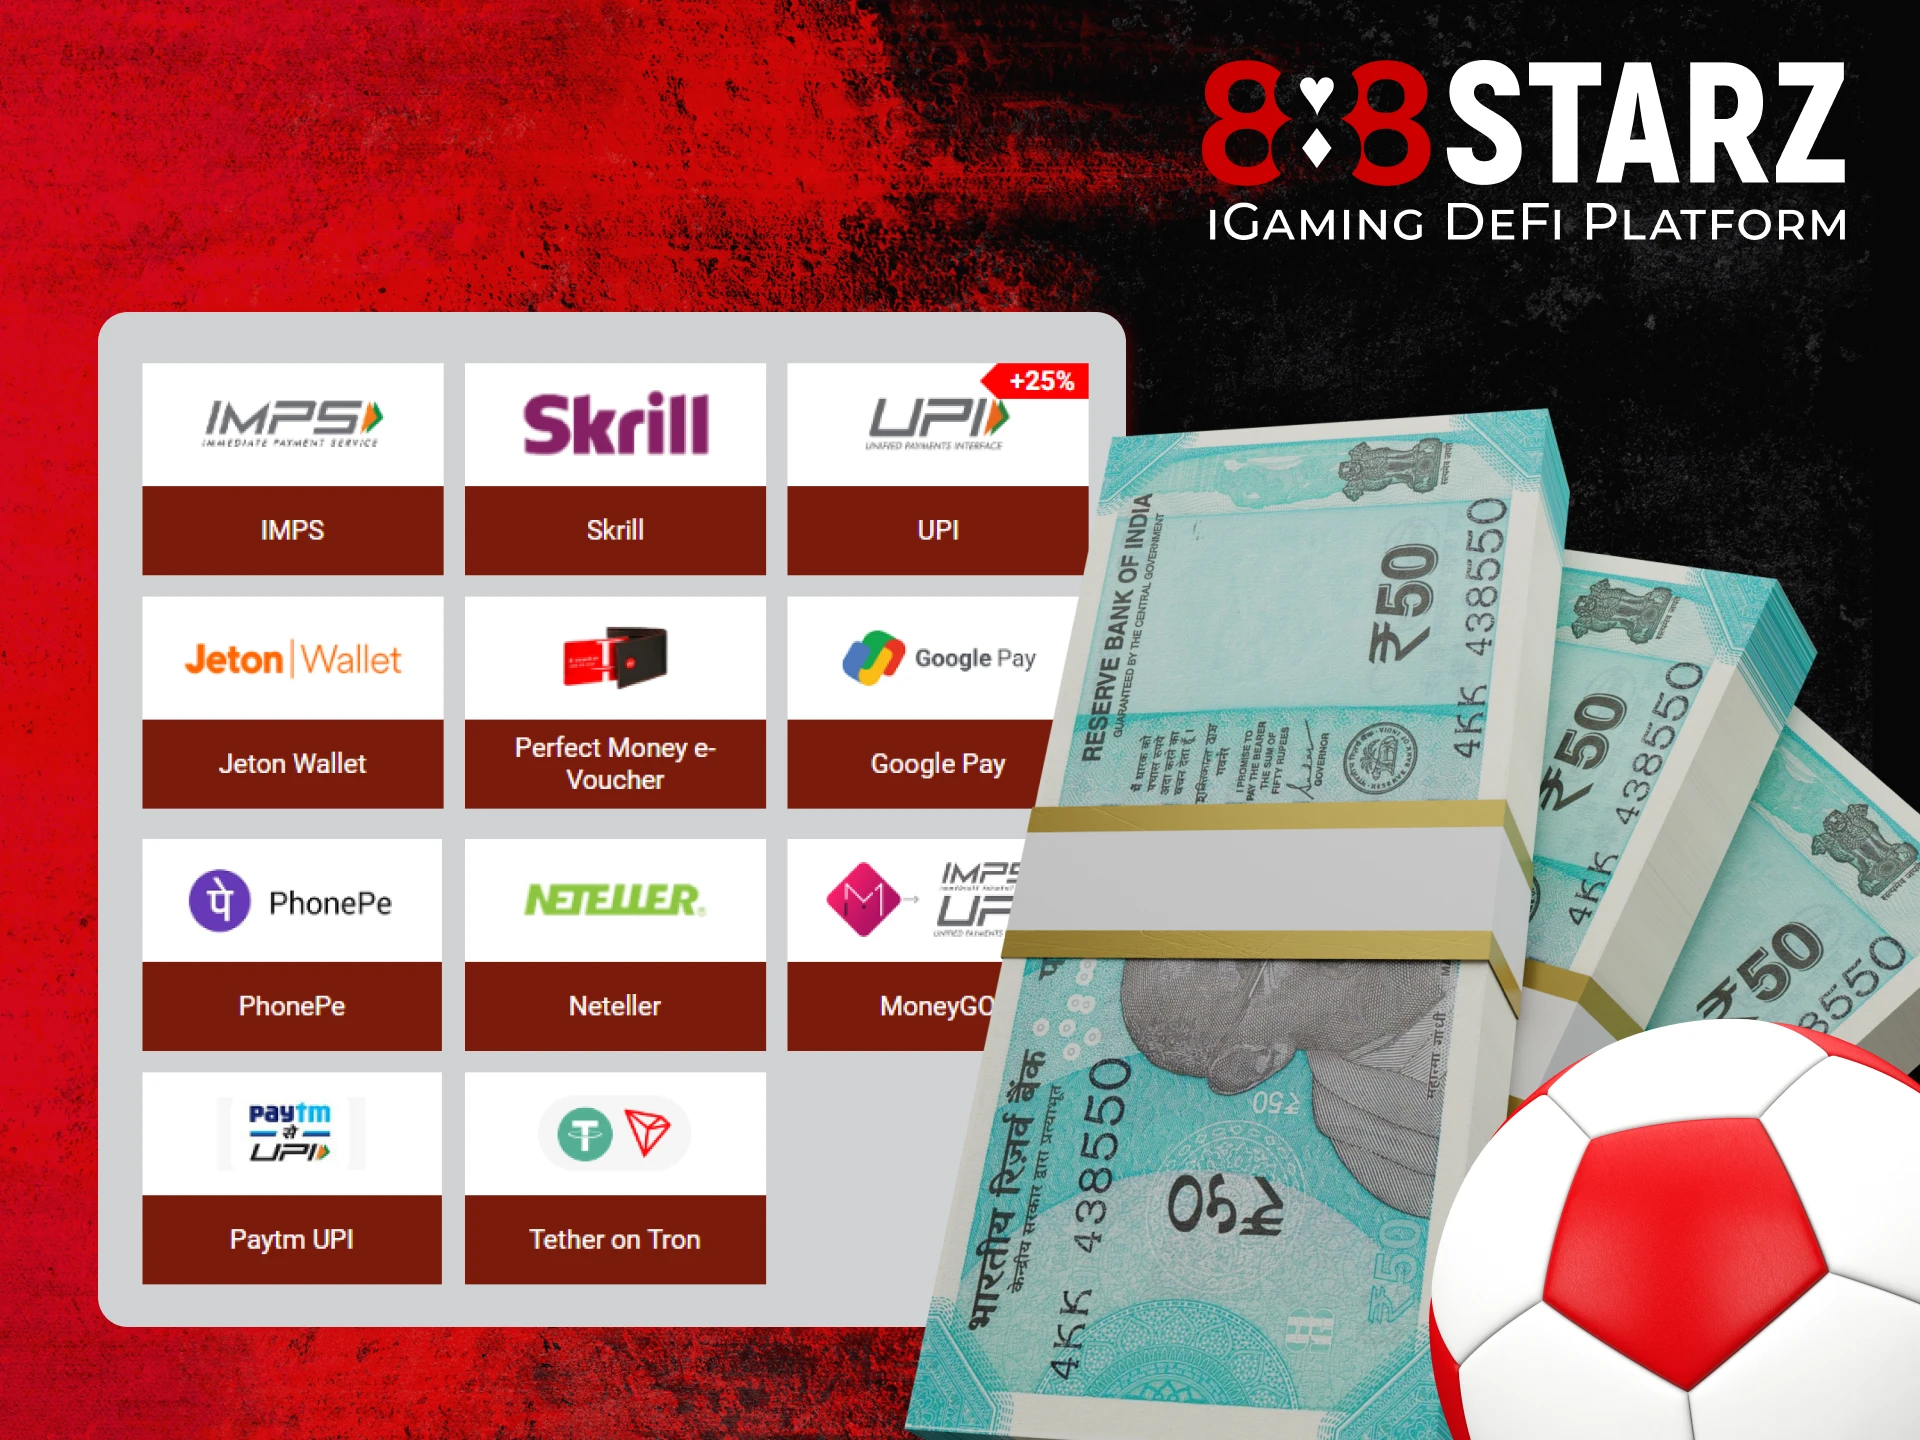 You can deposit and withdraw money from 888Starz in a way convenient for you.